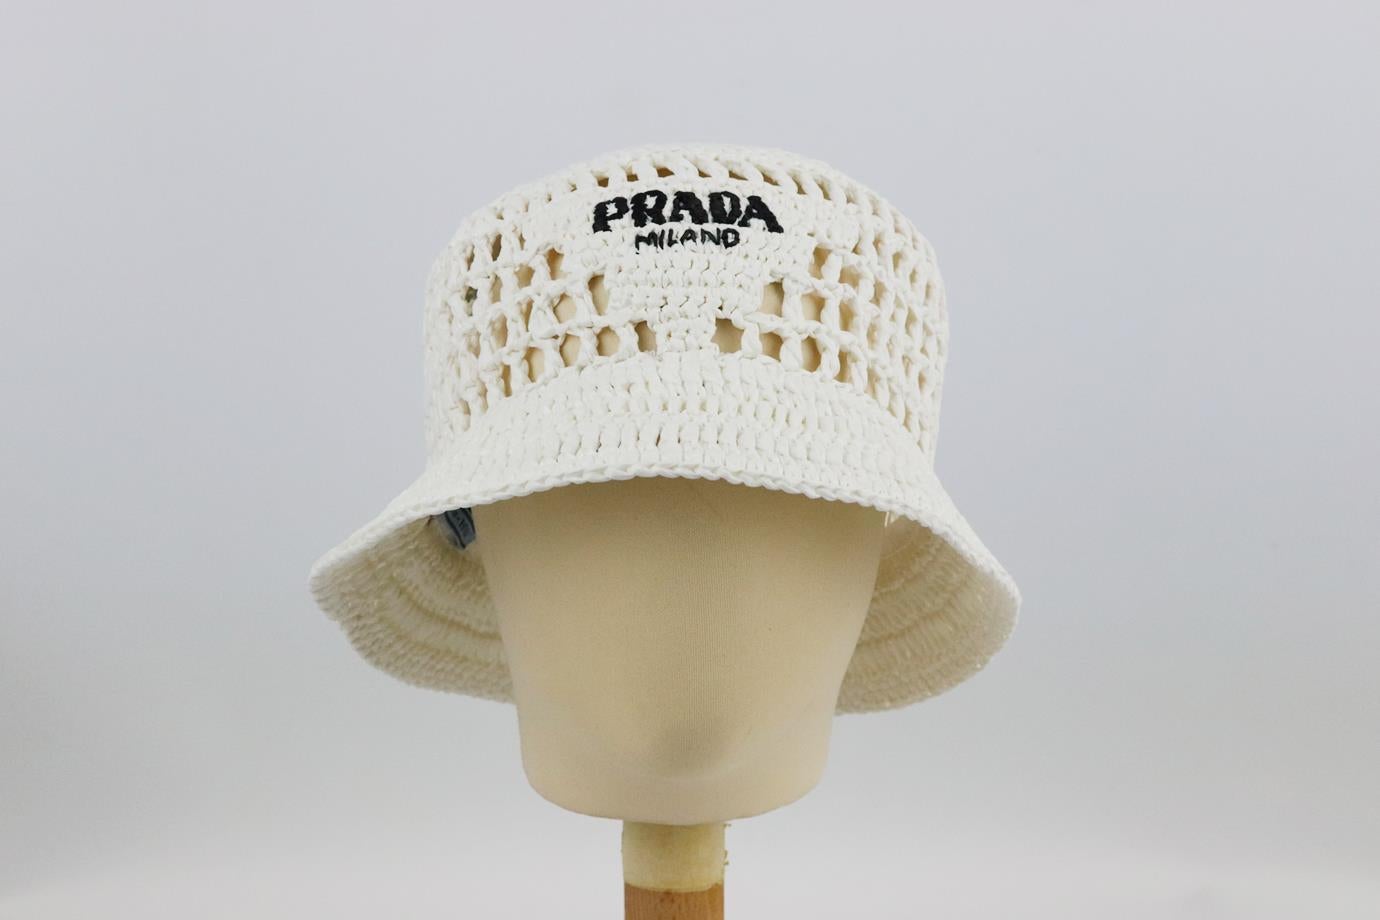 Prada logo embroidered raffia bucket hat. White and black. Slips on. Comes with dustbag. Size: Large (Circumference: 22.2 in)
